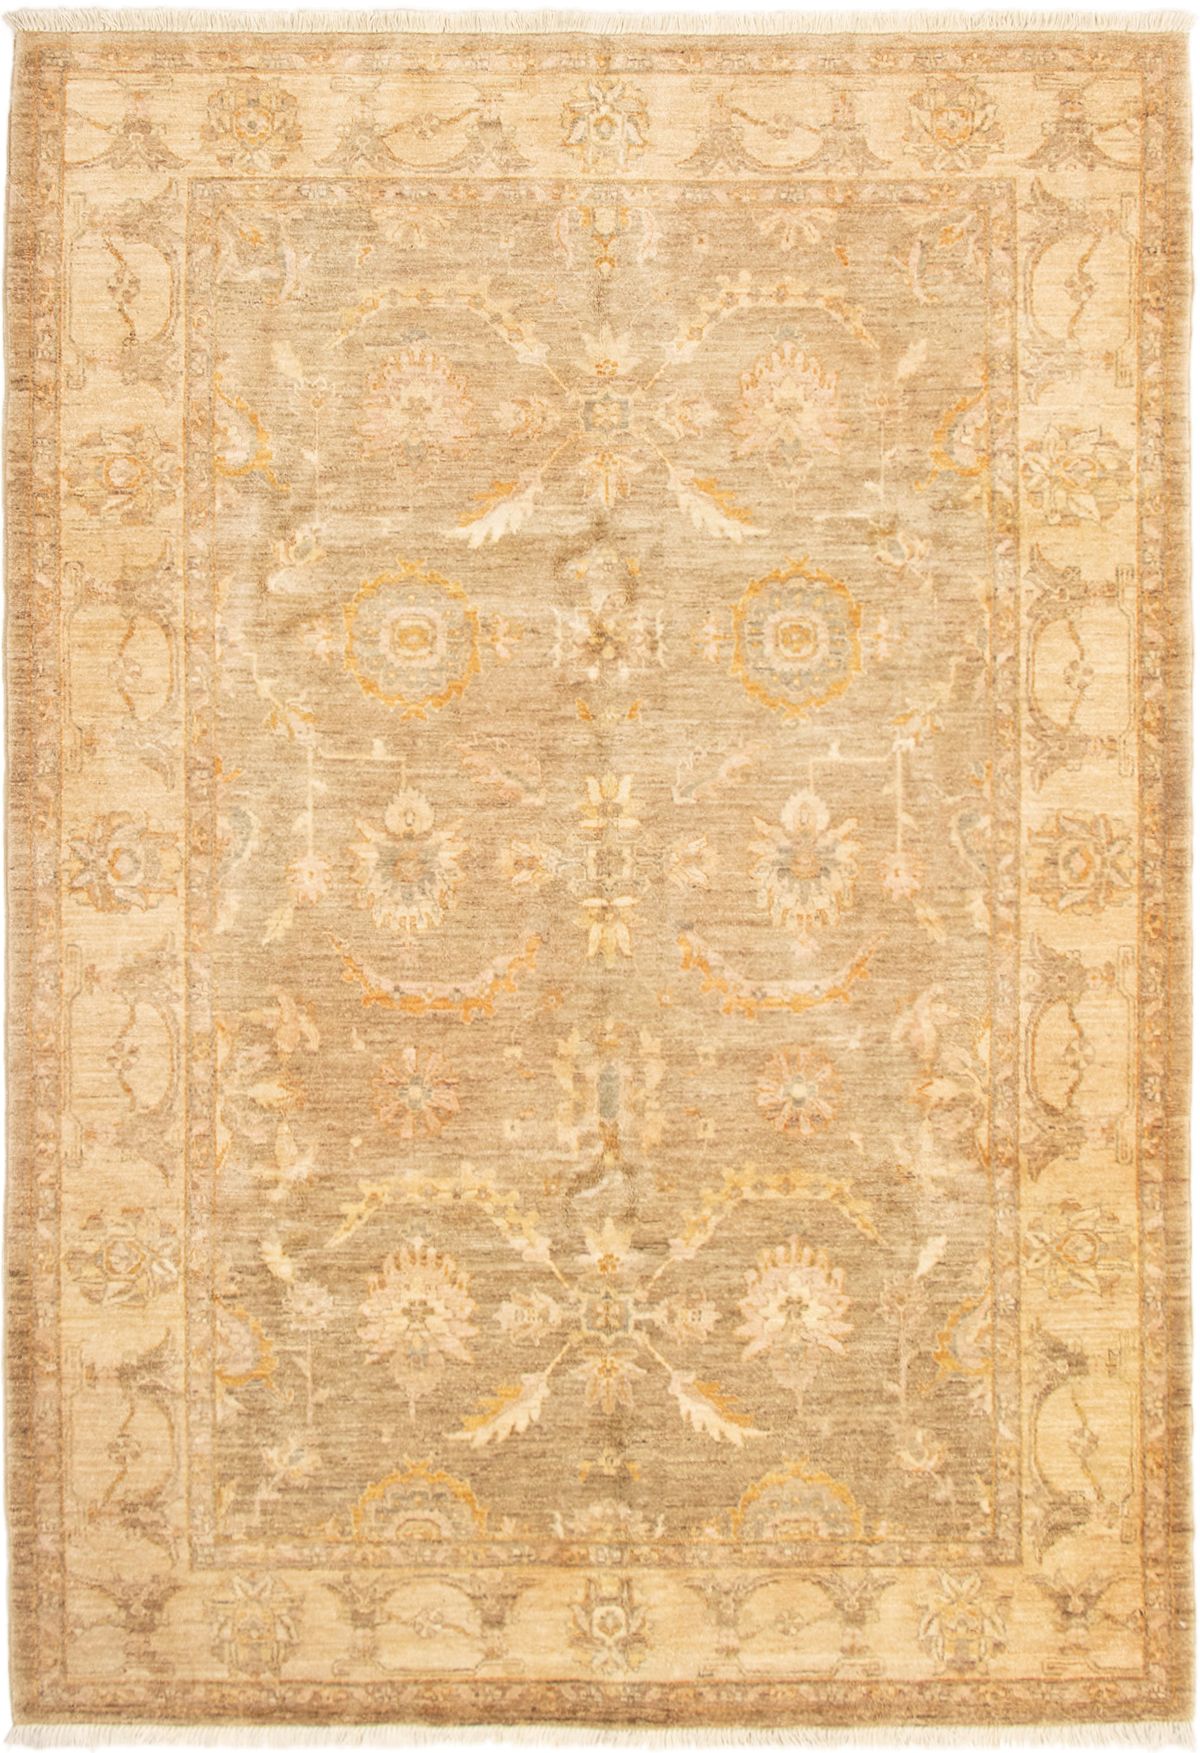 Hand-knotted Chobi Twisted Brown Wool Rug 6'5" x 9'2" Size: 6'5" x 9'2"  